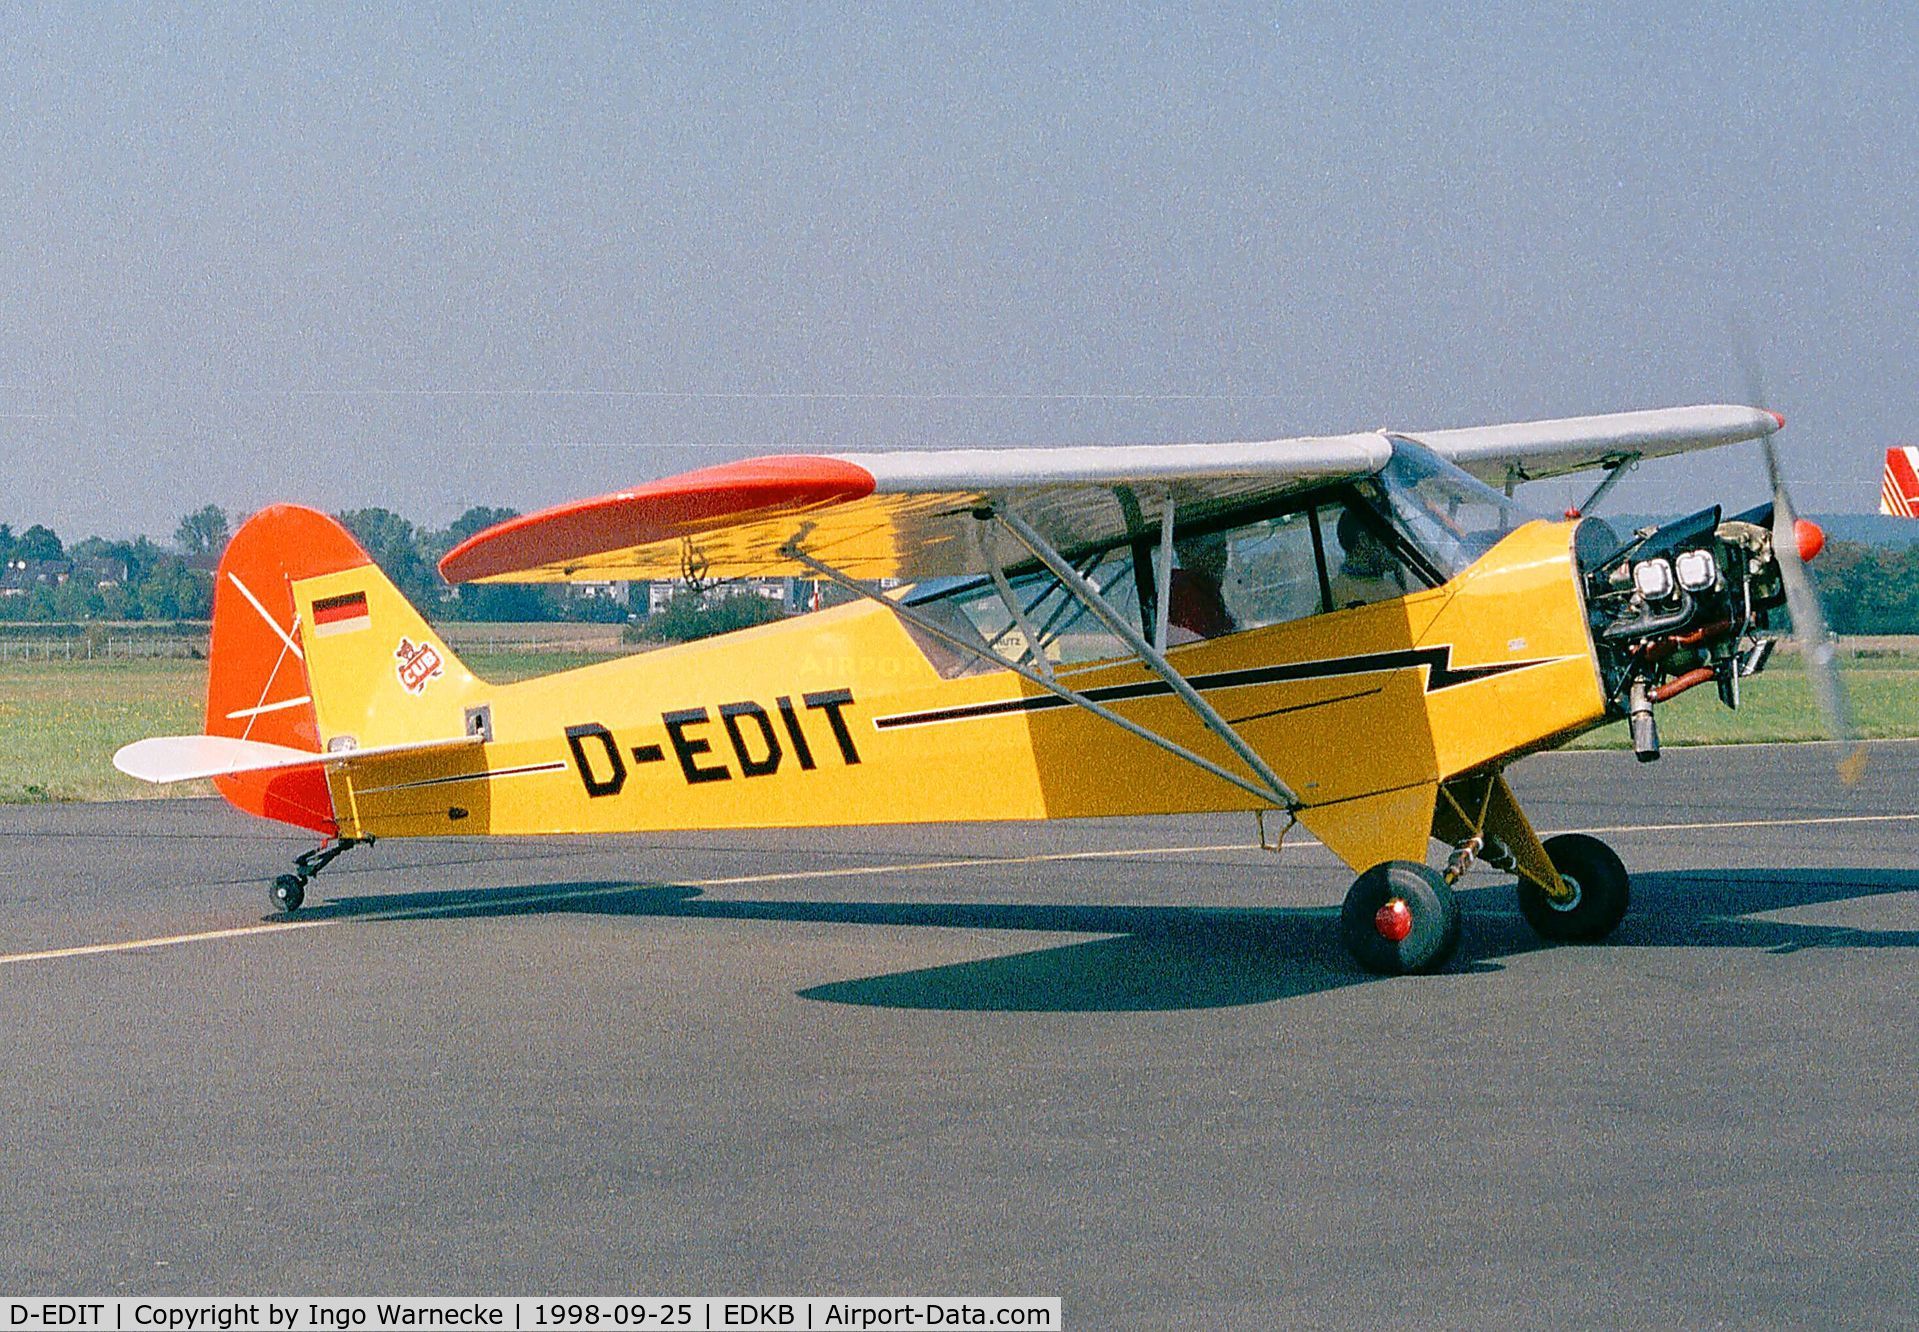 D-EDIT, 1944 Piper J3C-90 Cub C/N 12722, Piper J3C-90 Cub at Bonn-Hangelar airfield